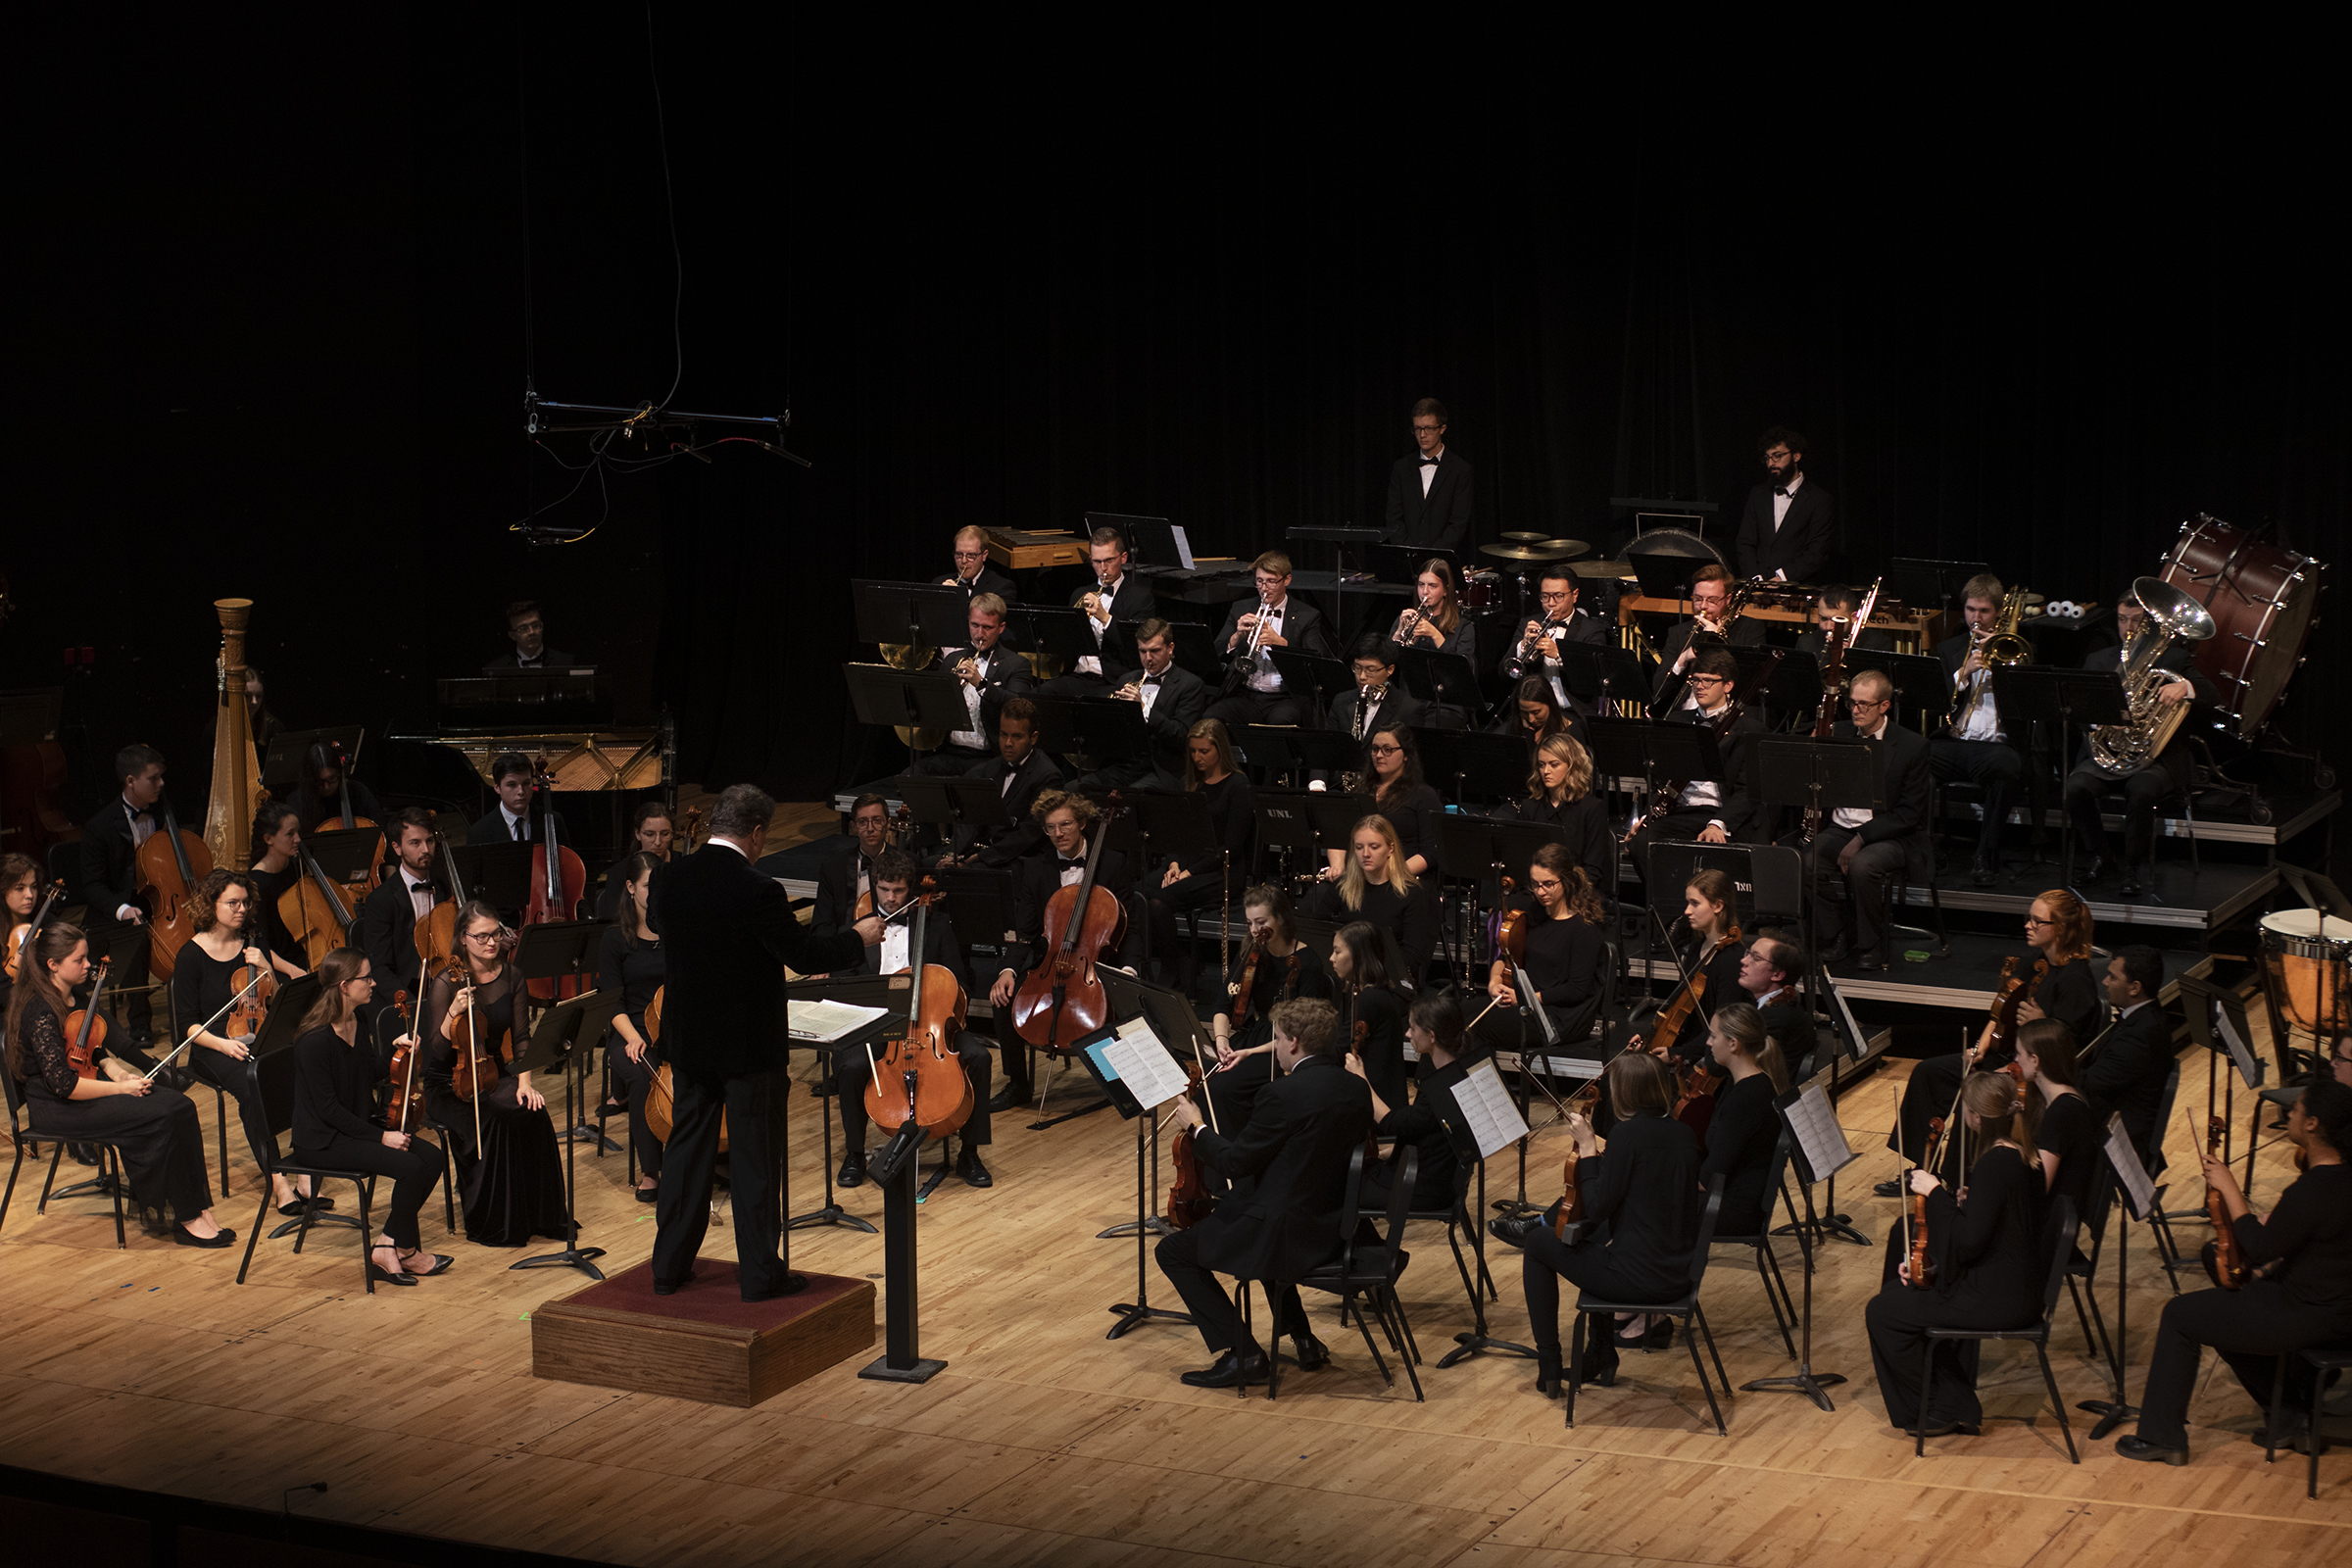 The Symphony Orchestra will perform Friday, Oct. 6 at 7:30 p.m. at St. Paul United Methodist Church in Lincoln.